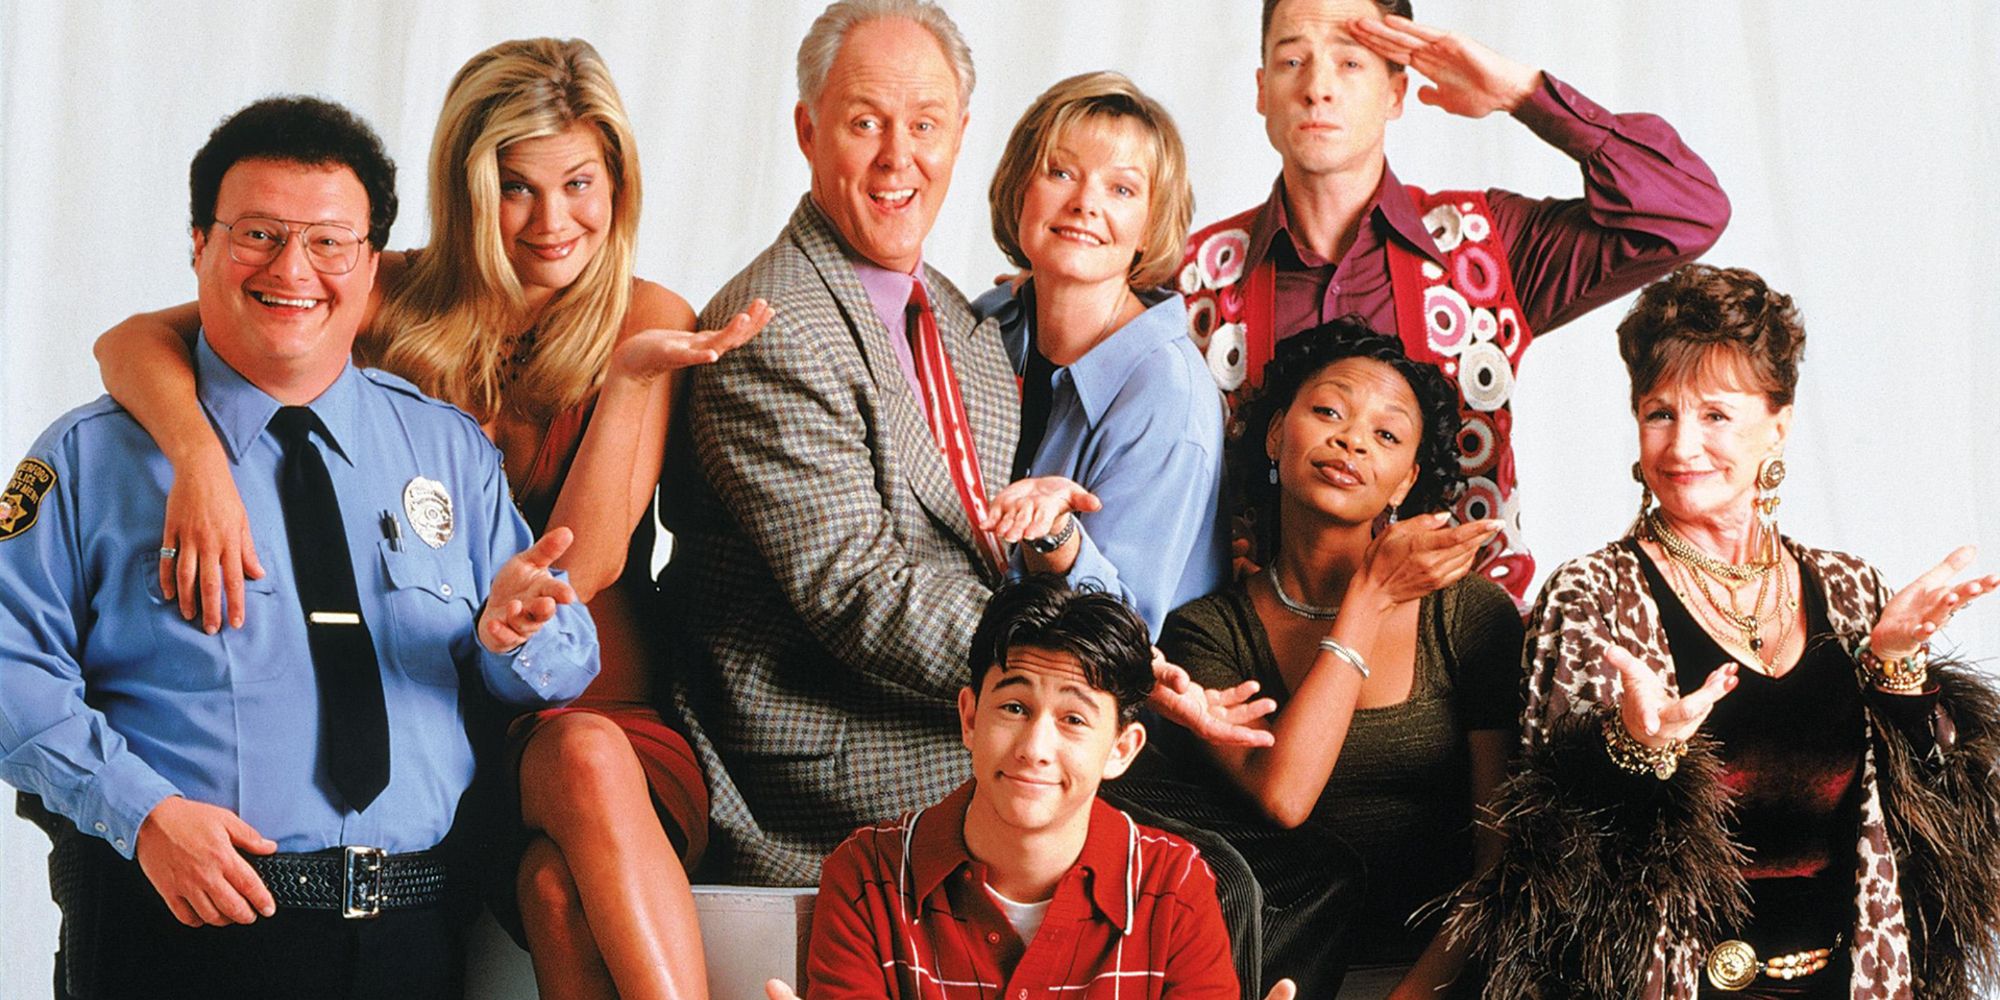 With the cast of 3rd Rock from the Sun